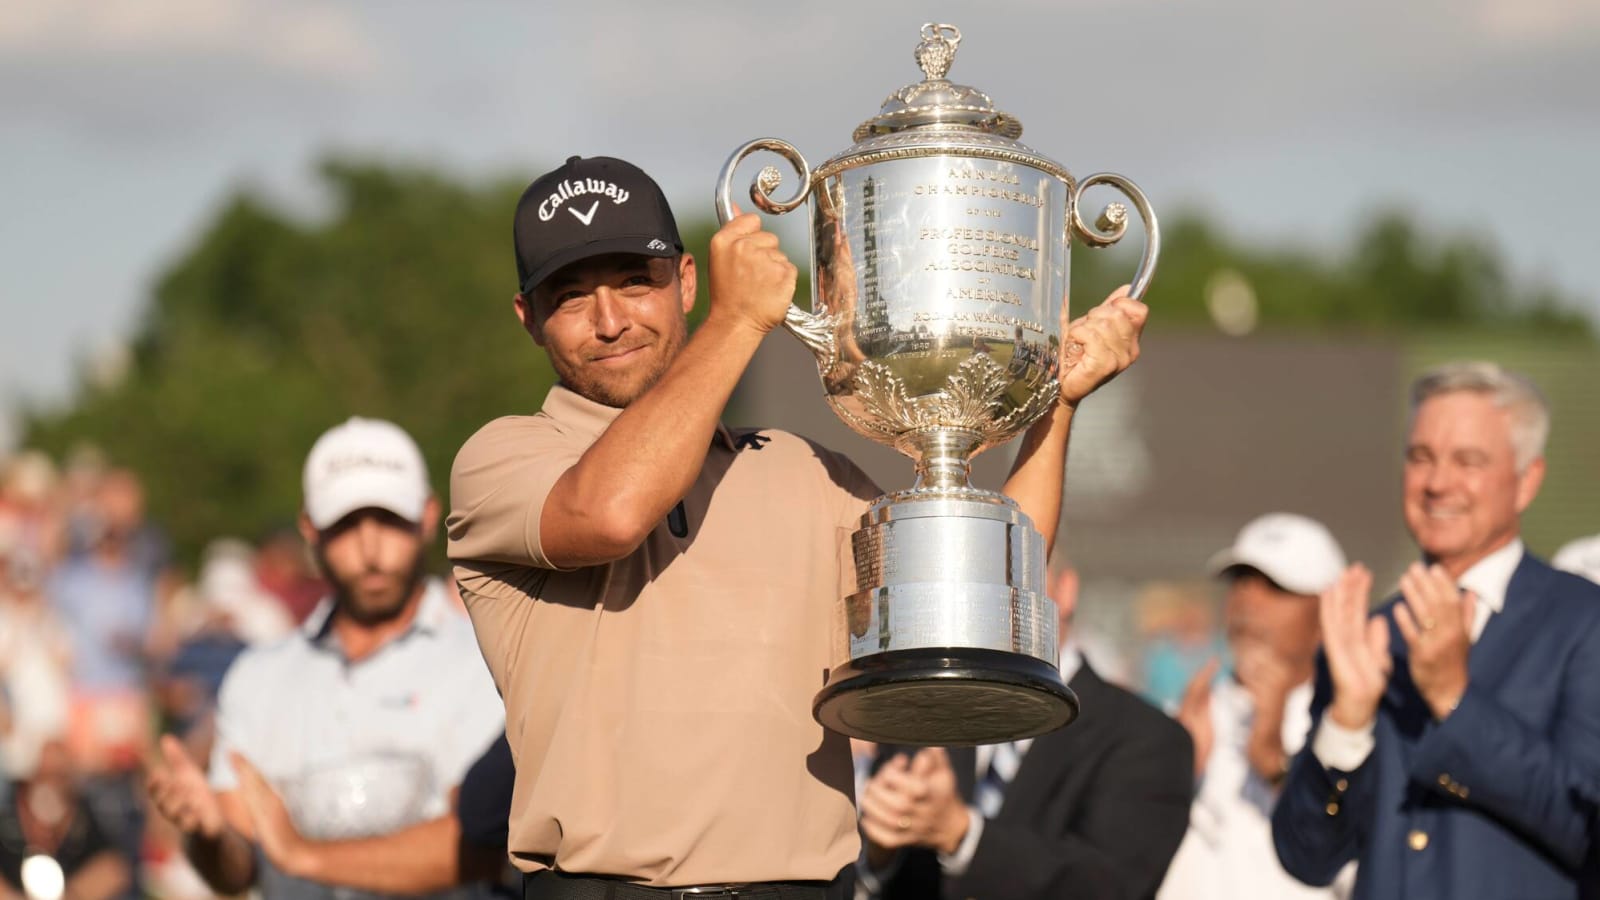 Xander Schauffele's triumph could open the floodgates for his career